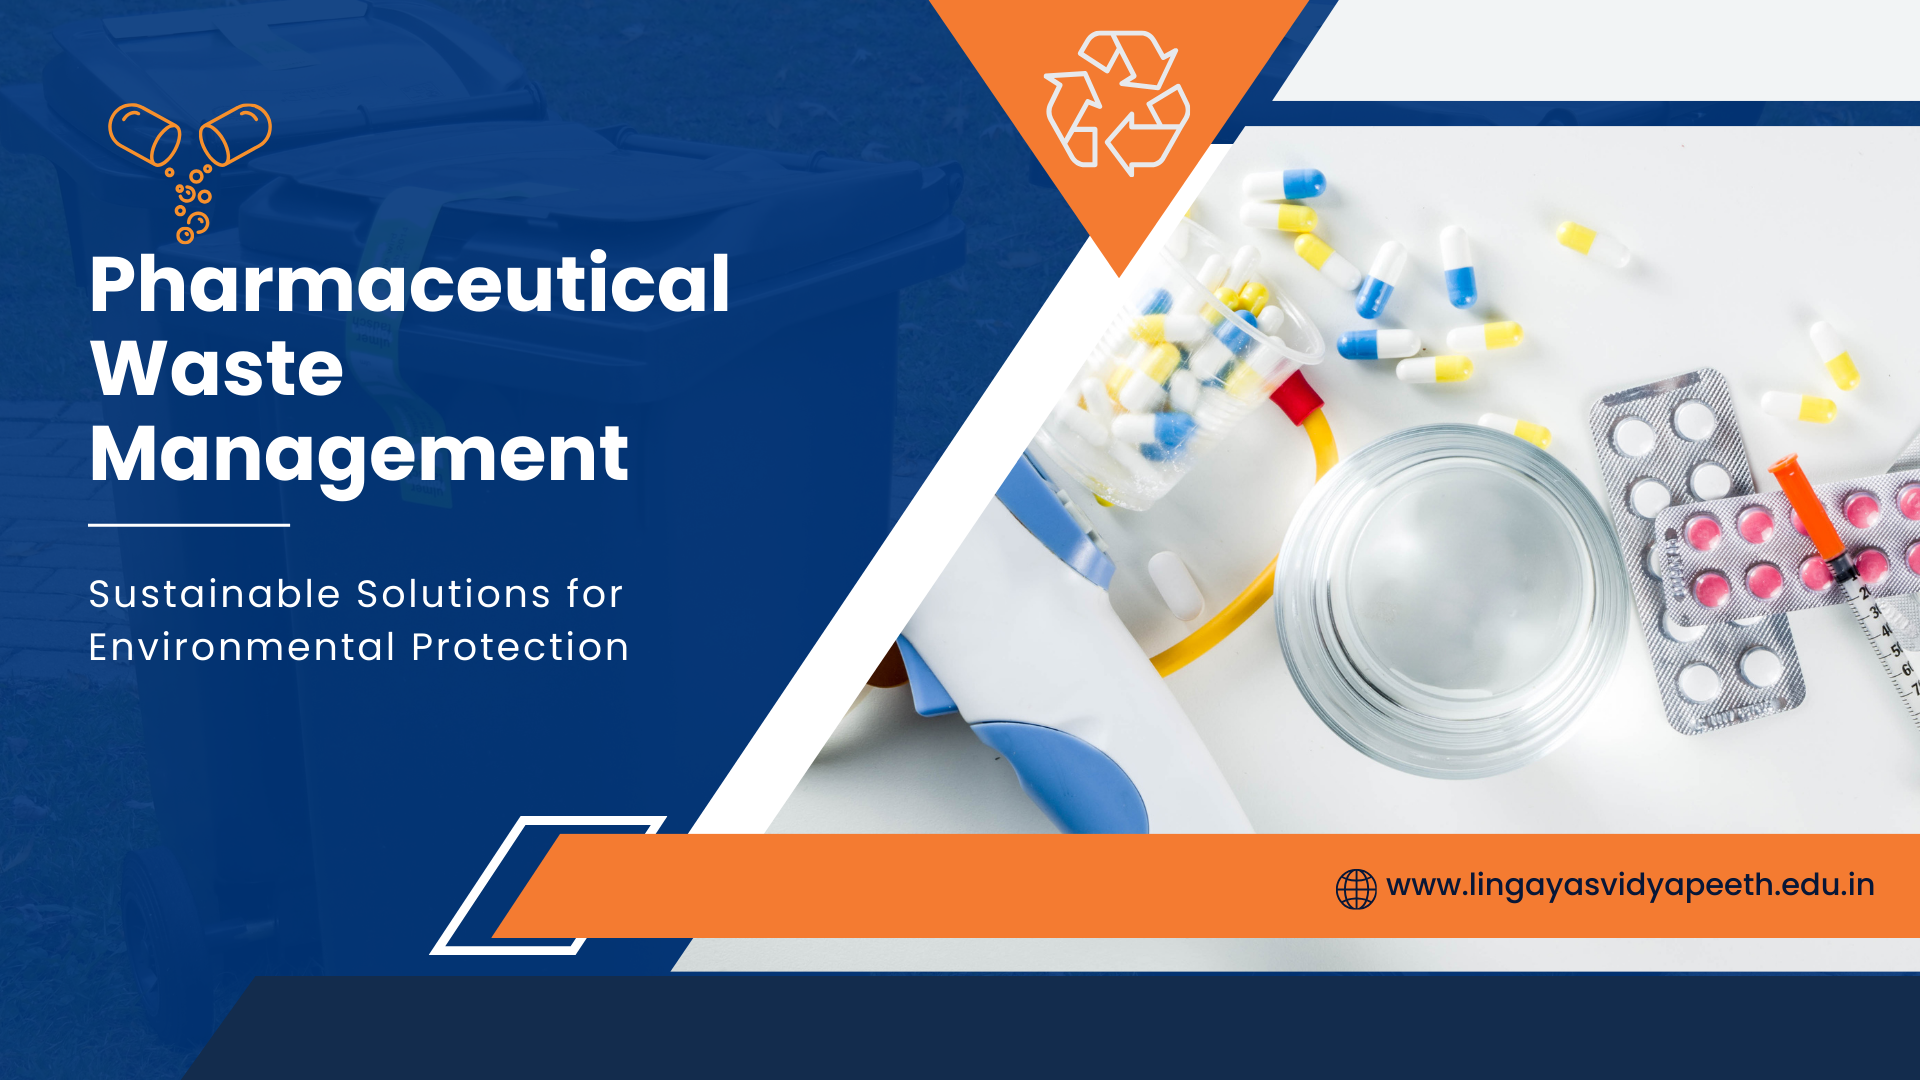 Pharmaceutical Waste Management: Sustainable Solutions for Environmental Protection